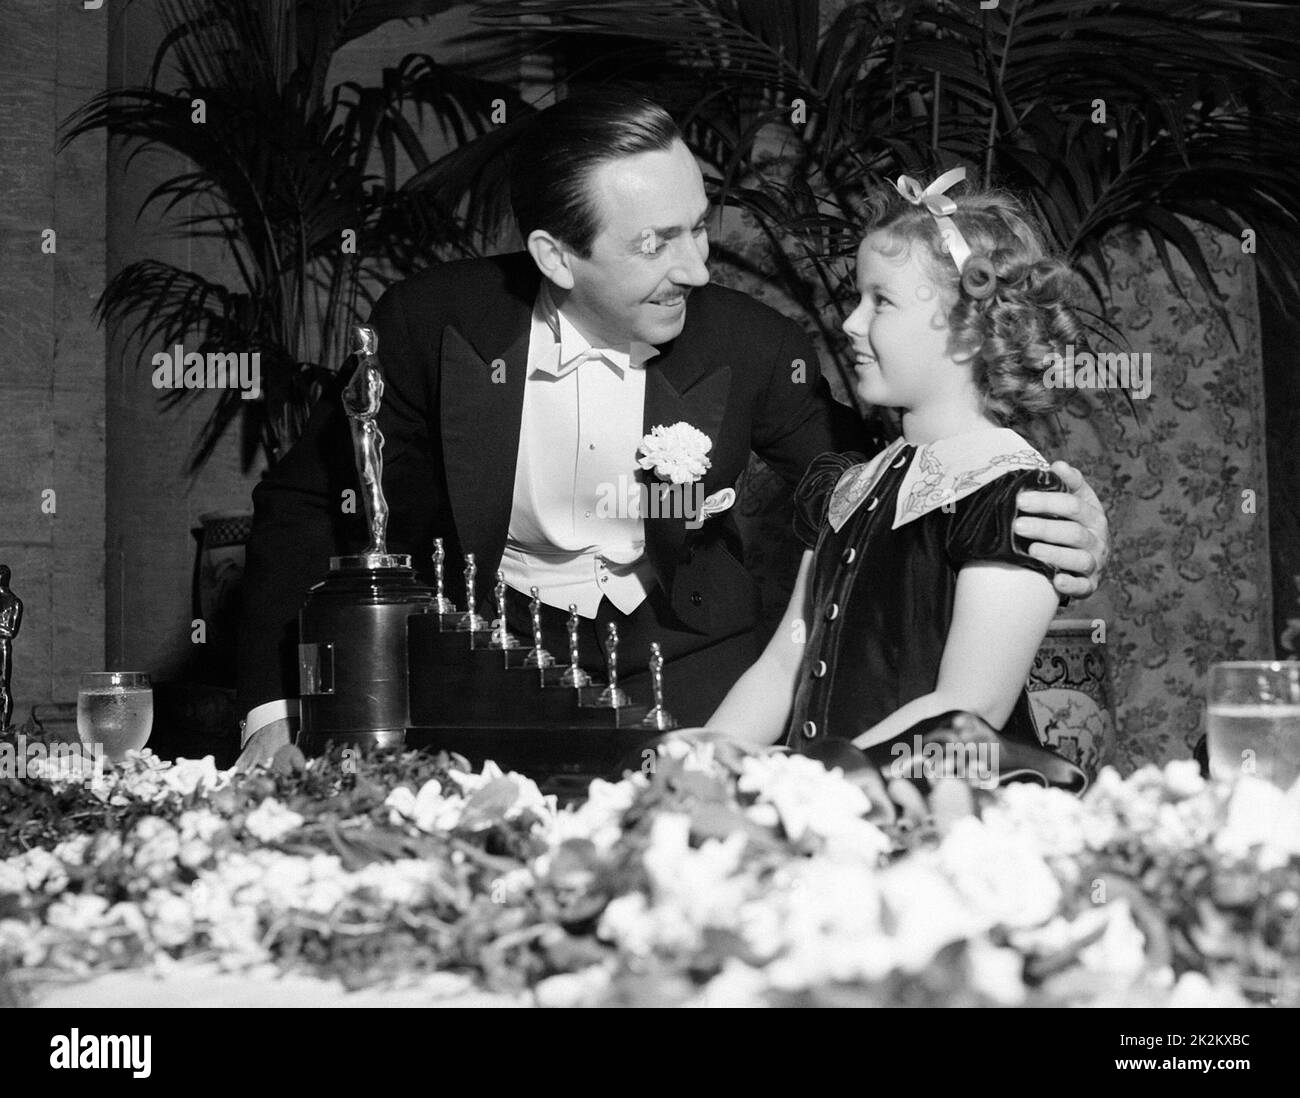 Shirley Temple and Walt Disney, Oscars ceremony in 1935. Shirley Temple receives the Juvenile Award In grateful recognition of her outstanding contribution to screen entertainment during the year 1934. Stock Photo